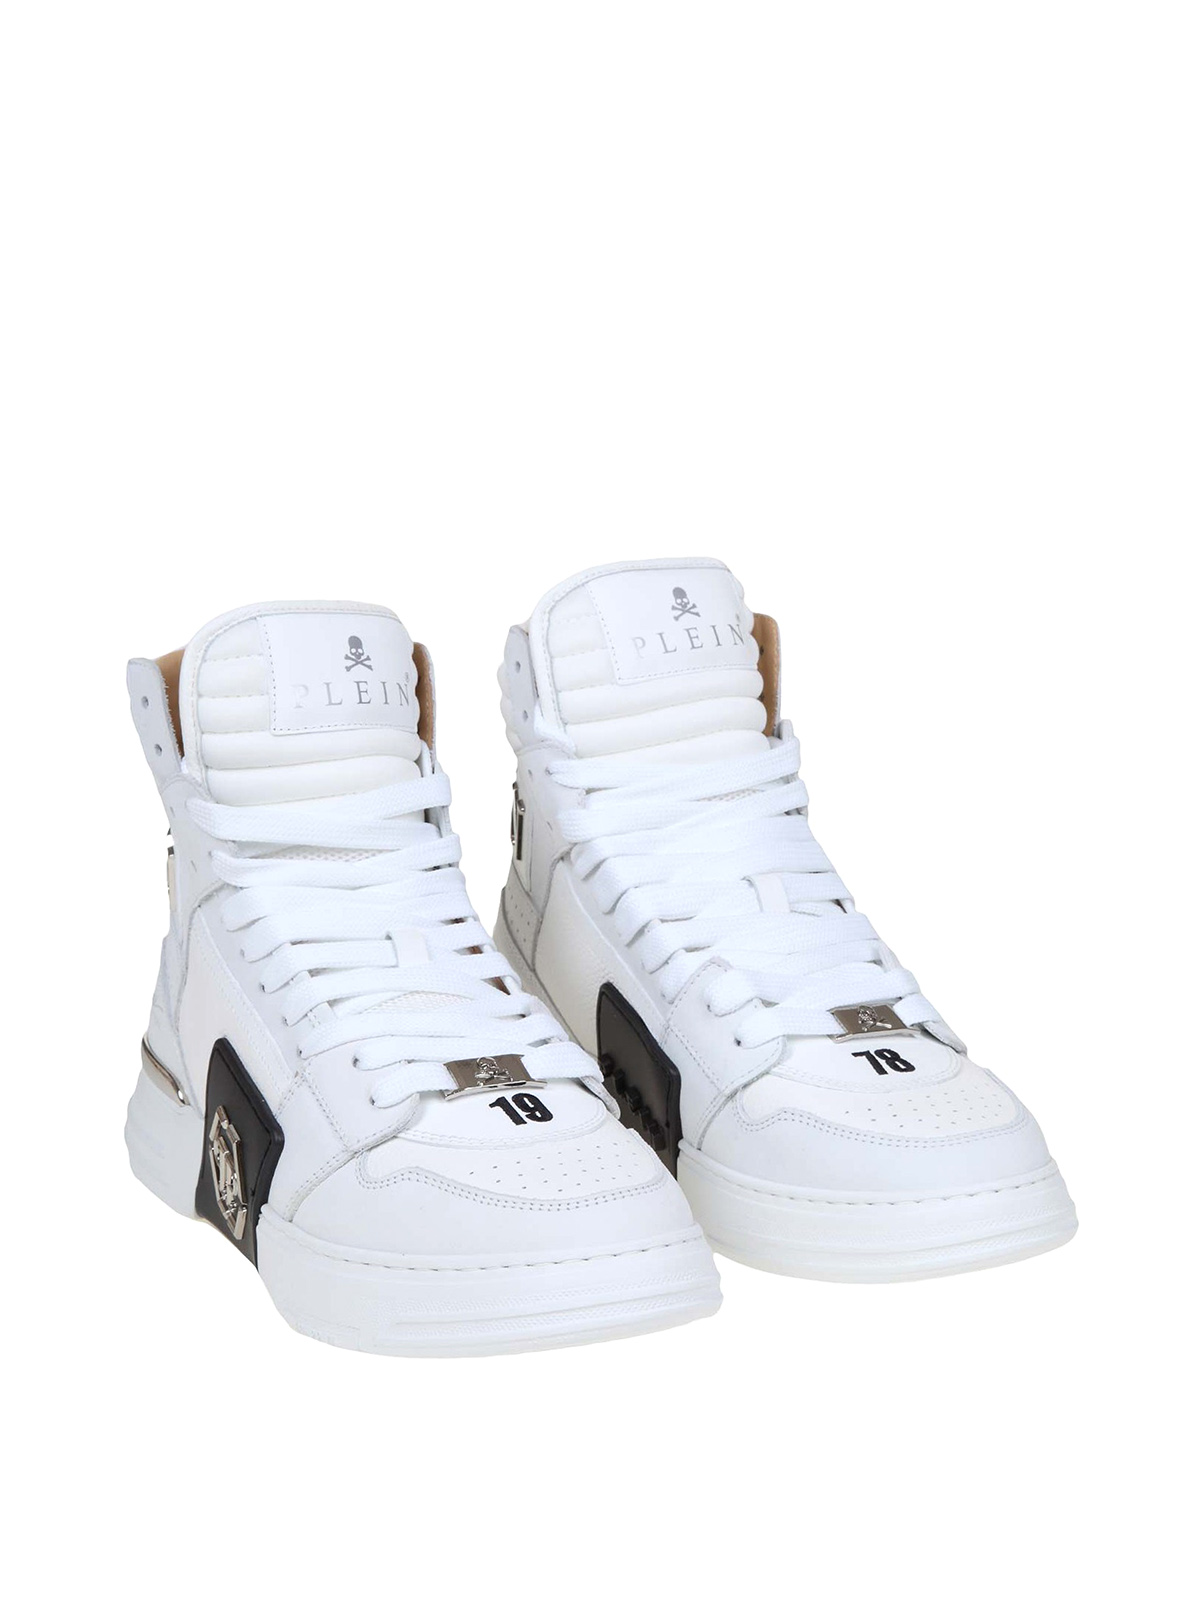 Prime Schat Optimistisch Trainers Philipp Plein - Snaekers hi-top in limited edition leather -  USC0273PLE010N01